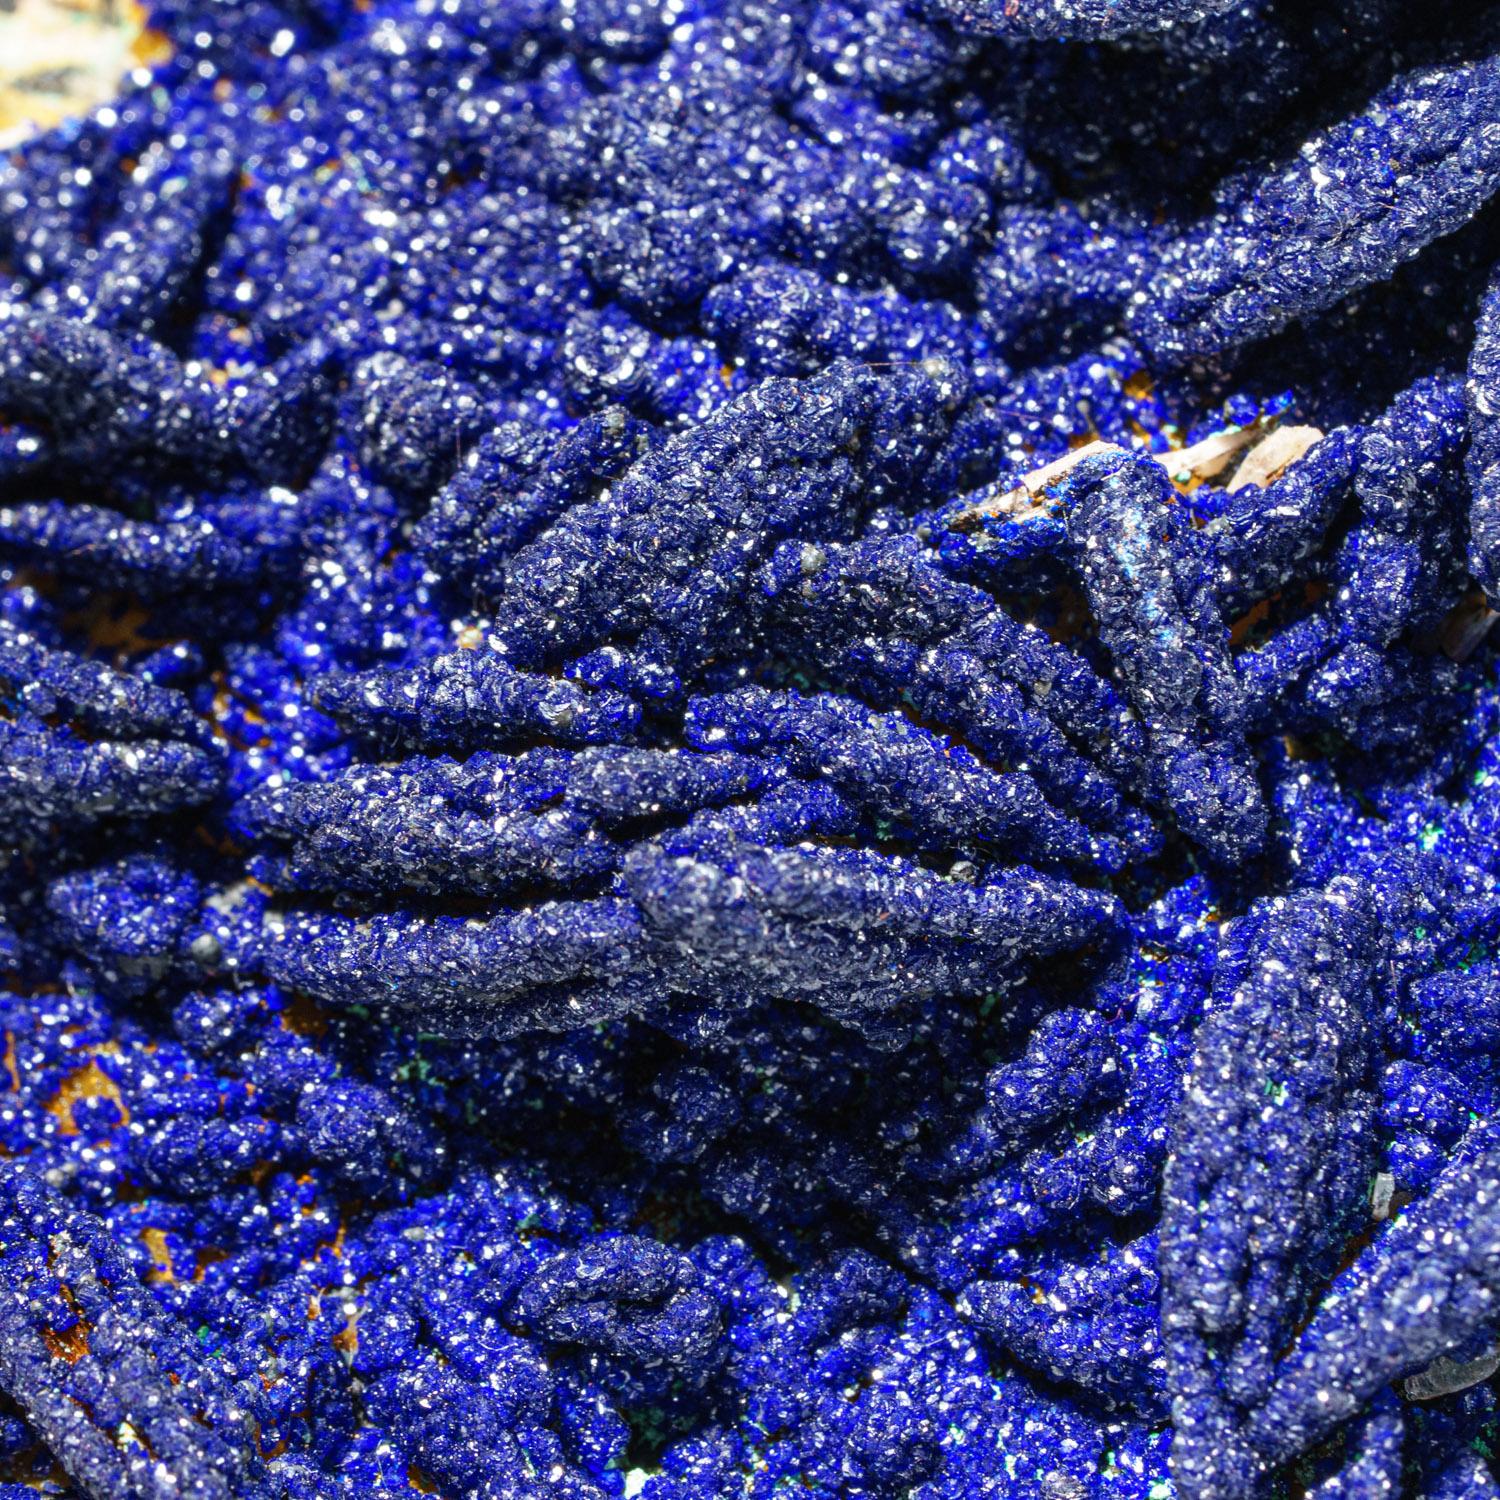 Contemporary Azurite from Ahouli Mines, Aouli, Zeida-Aouli-Mibladen belt, Midelt Province, Mo For Sale